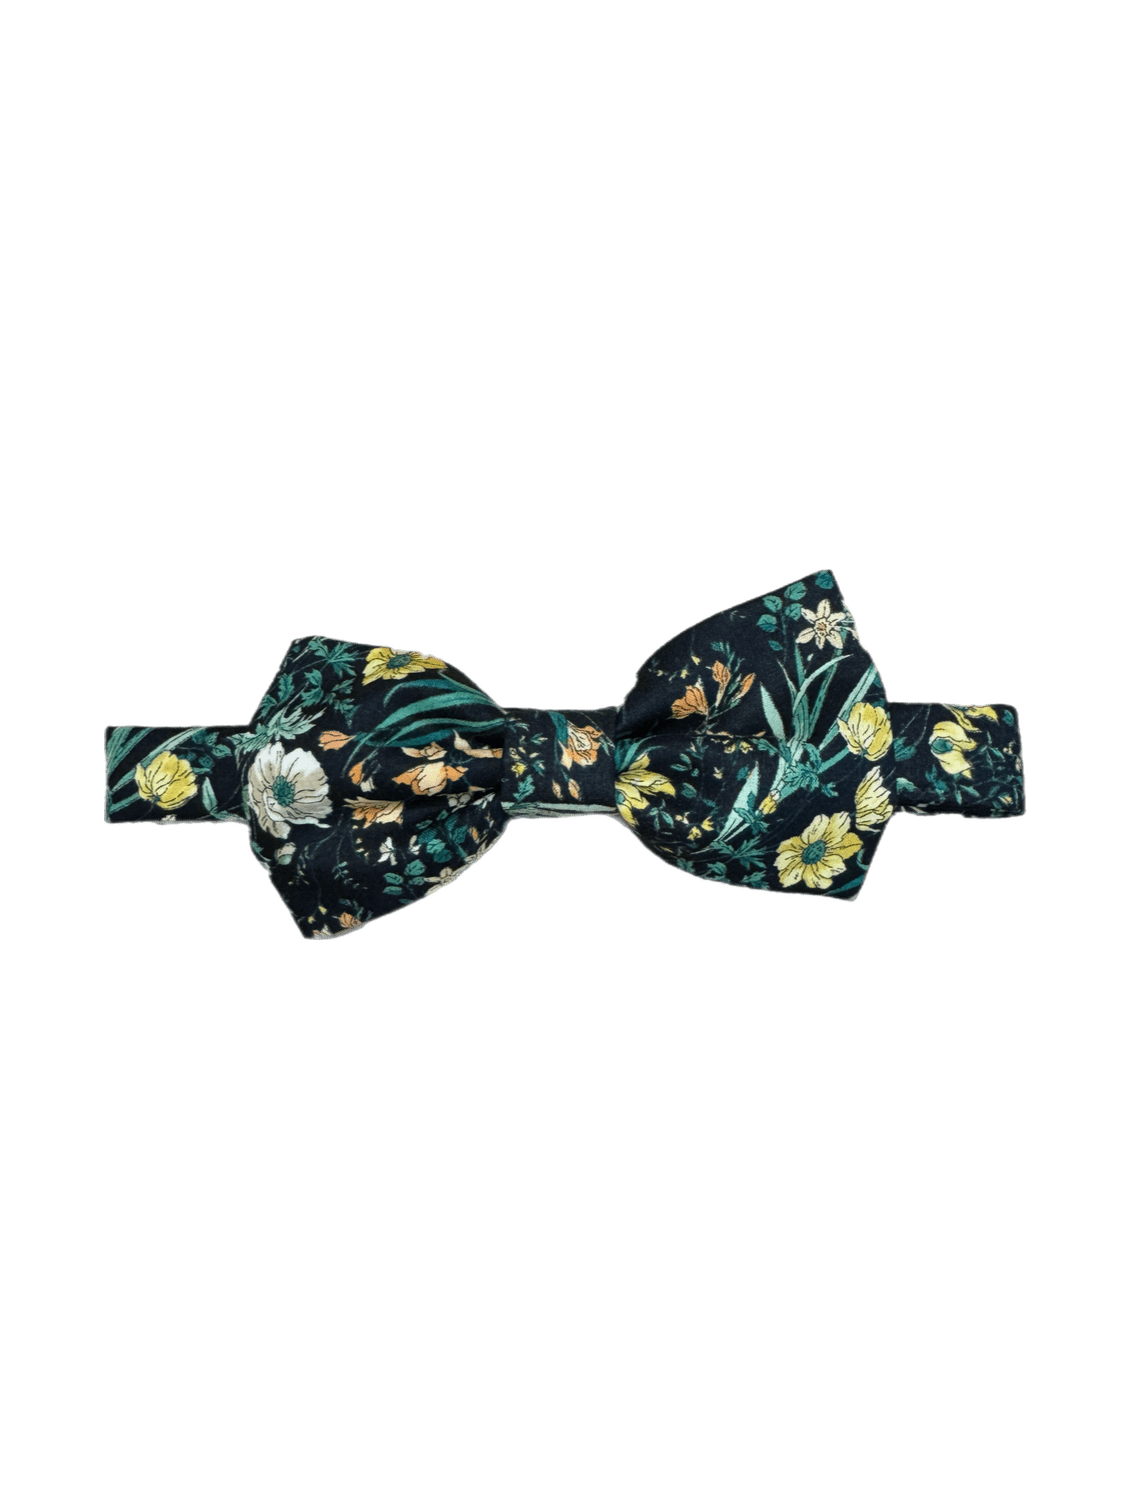 Bow Ties bow ties CHRISTINE ALCALAY Black and White Houndstooth  